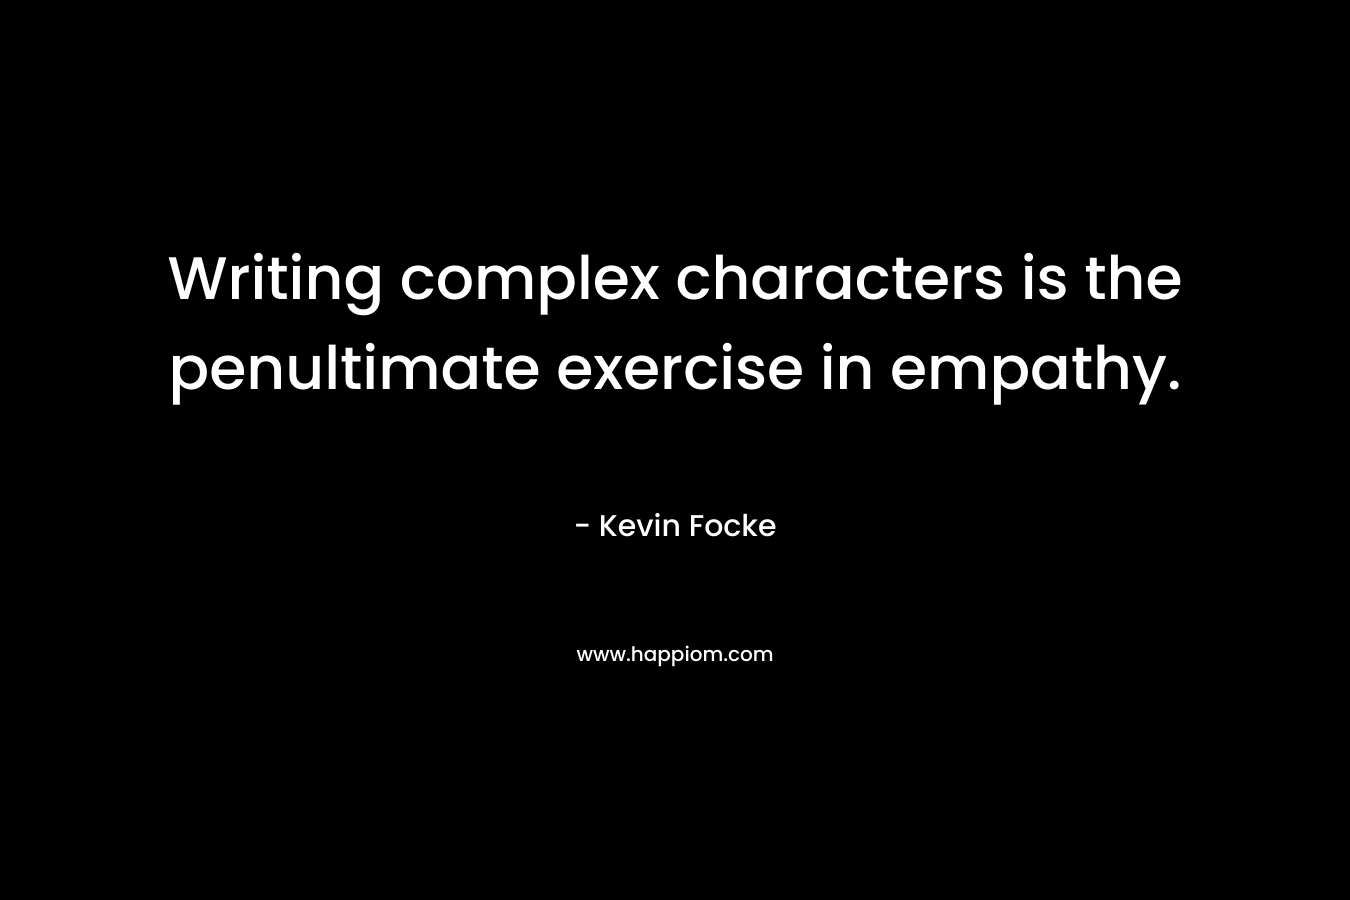 Writing complex characters is the penultimate exercise in empathy. – Kevin Focke